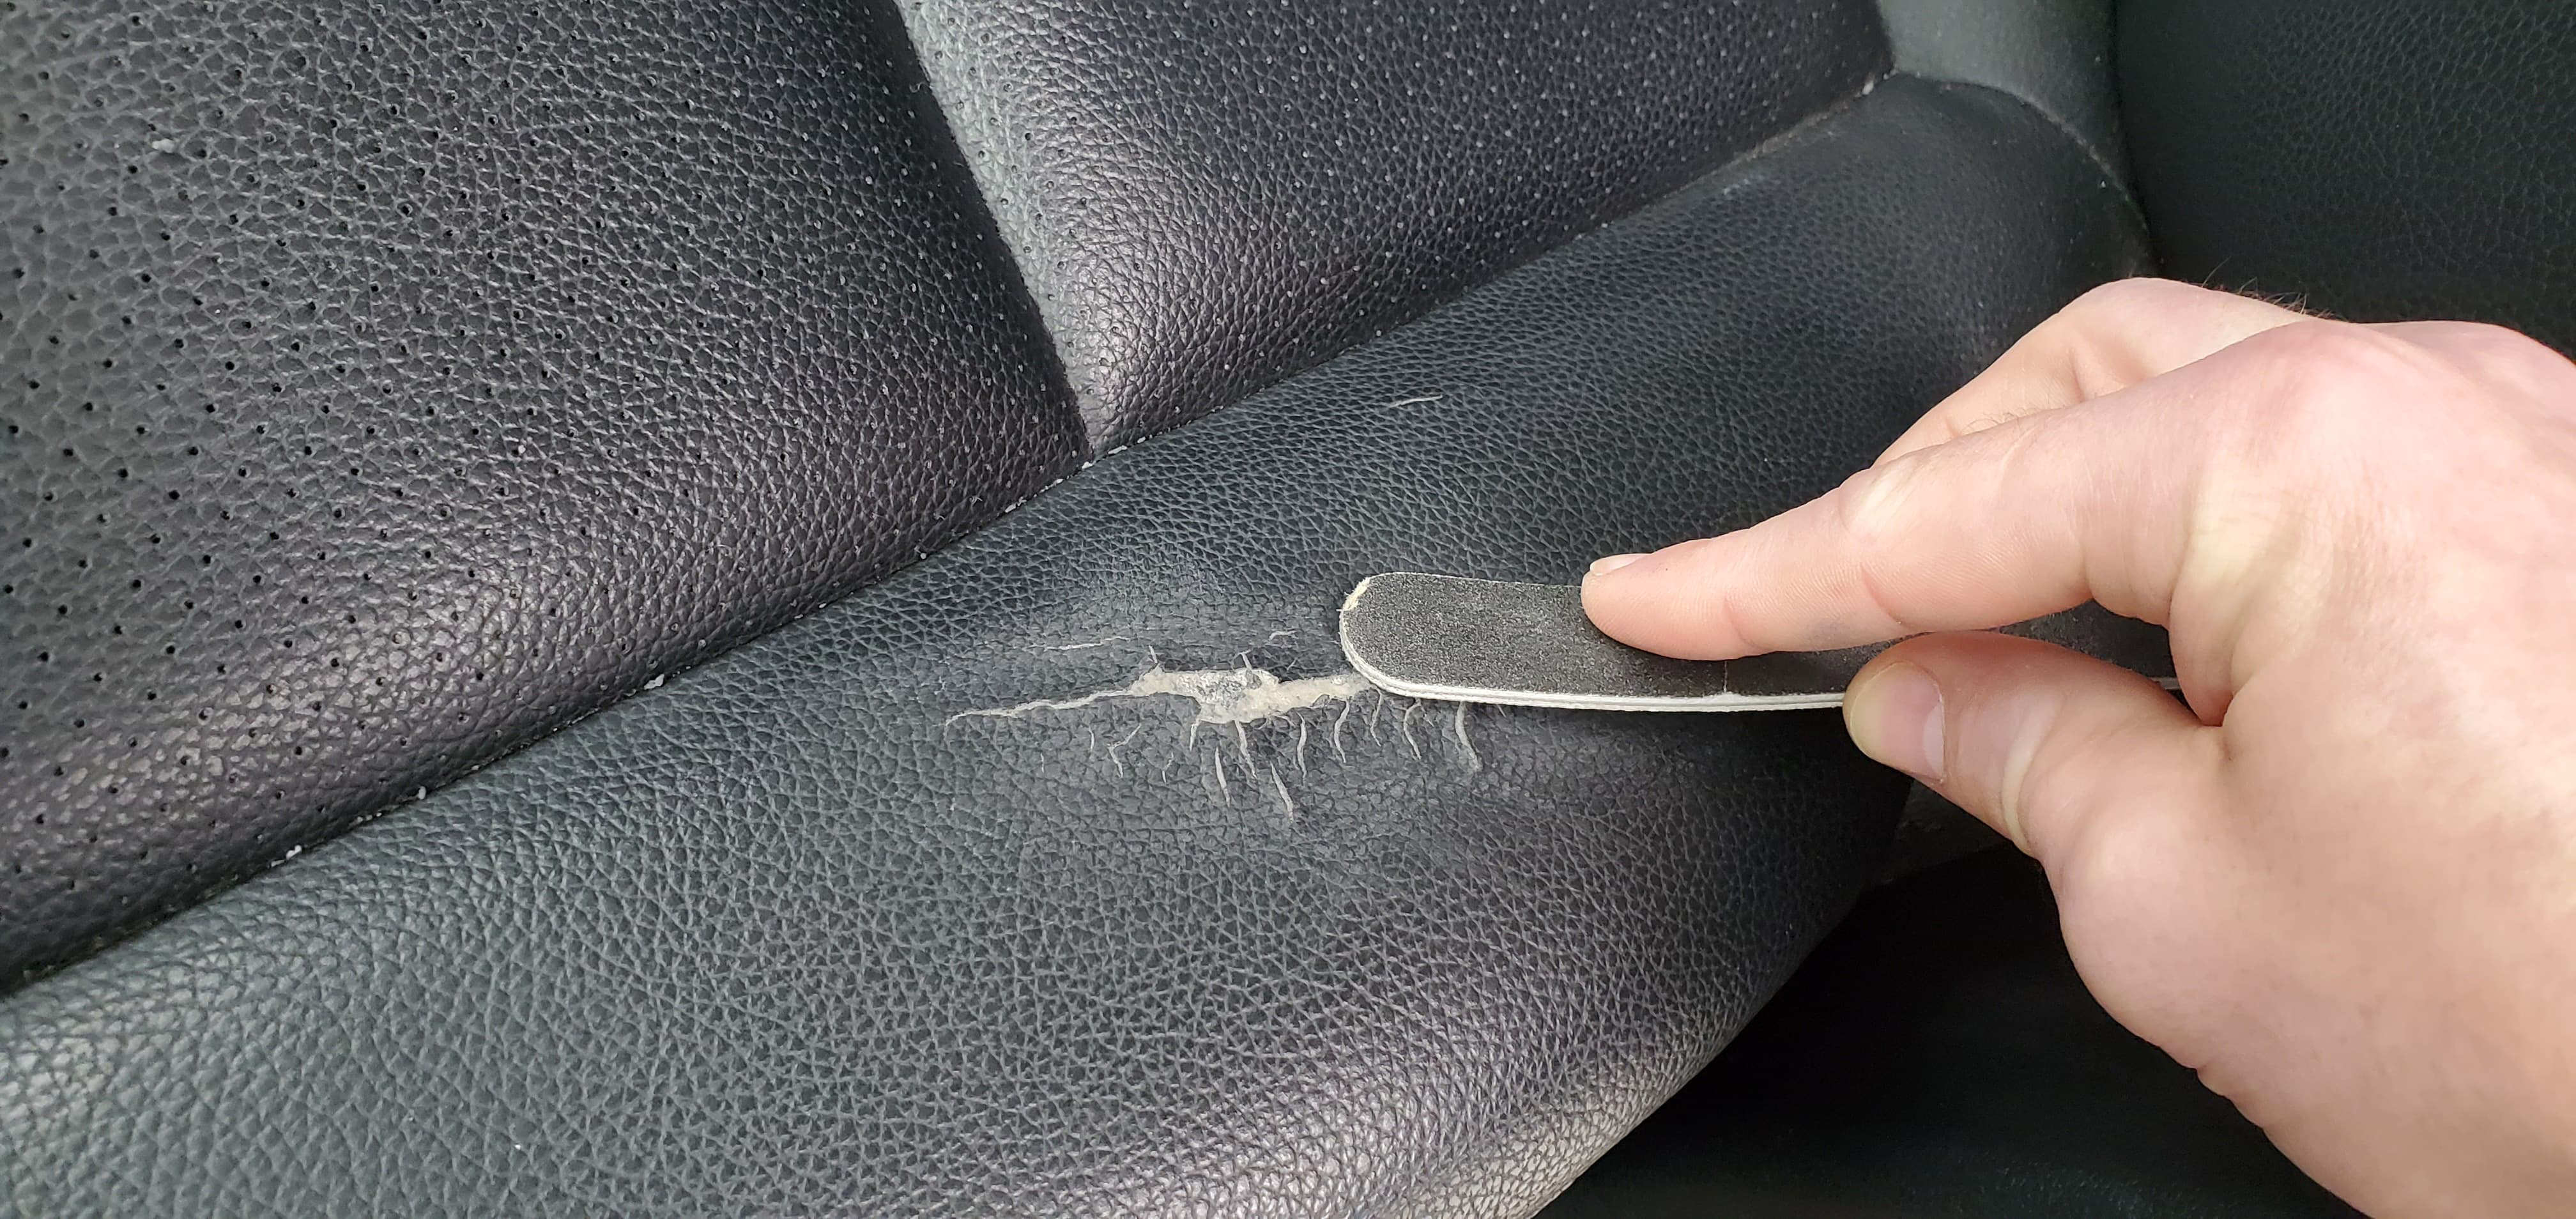 How To Repair A Leather Car Seat - How To Repair Hole In Car Seat Fabric